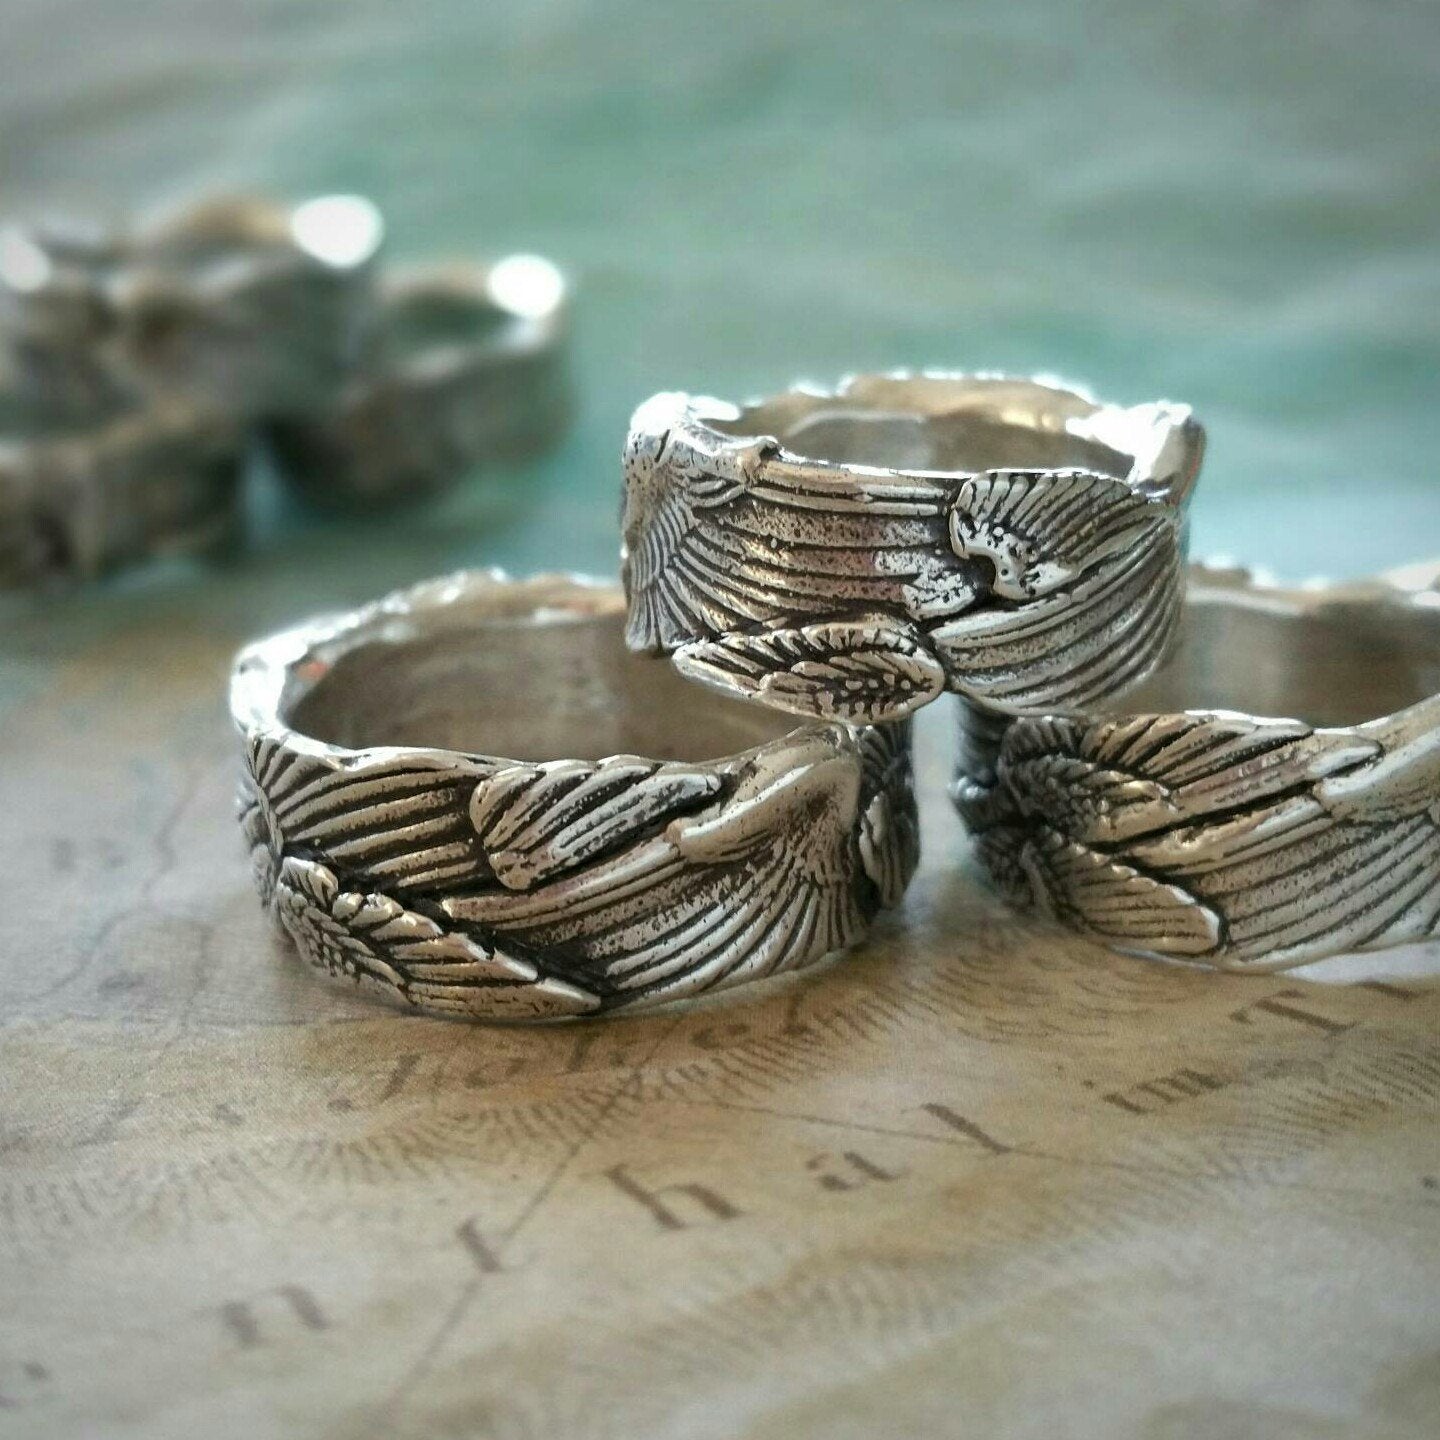 Best Boho Chic Silver Rings - HappyGoLicky Jewelry